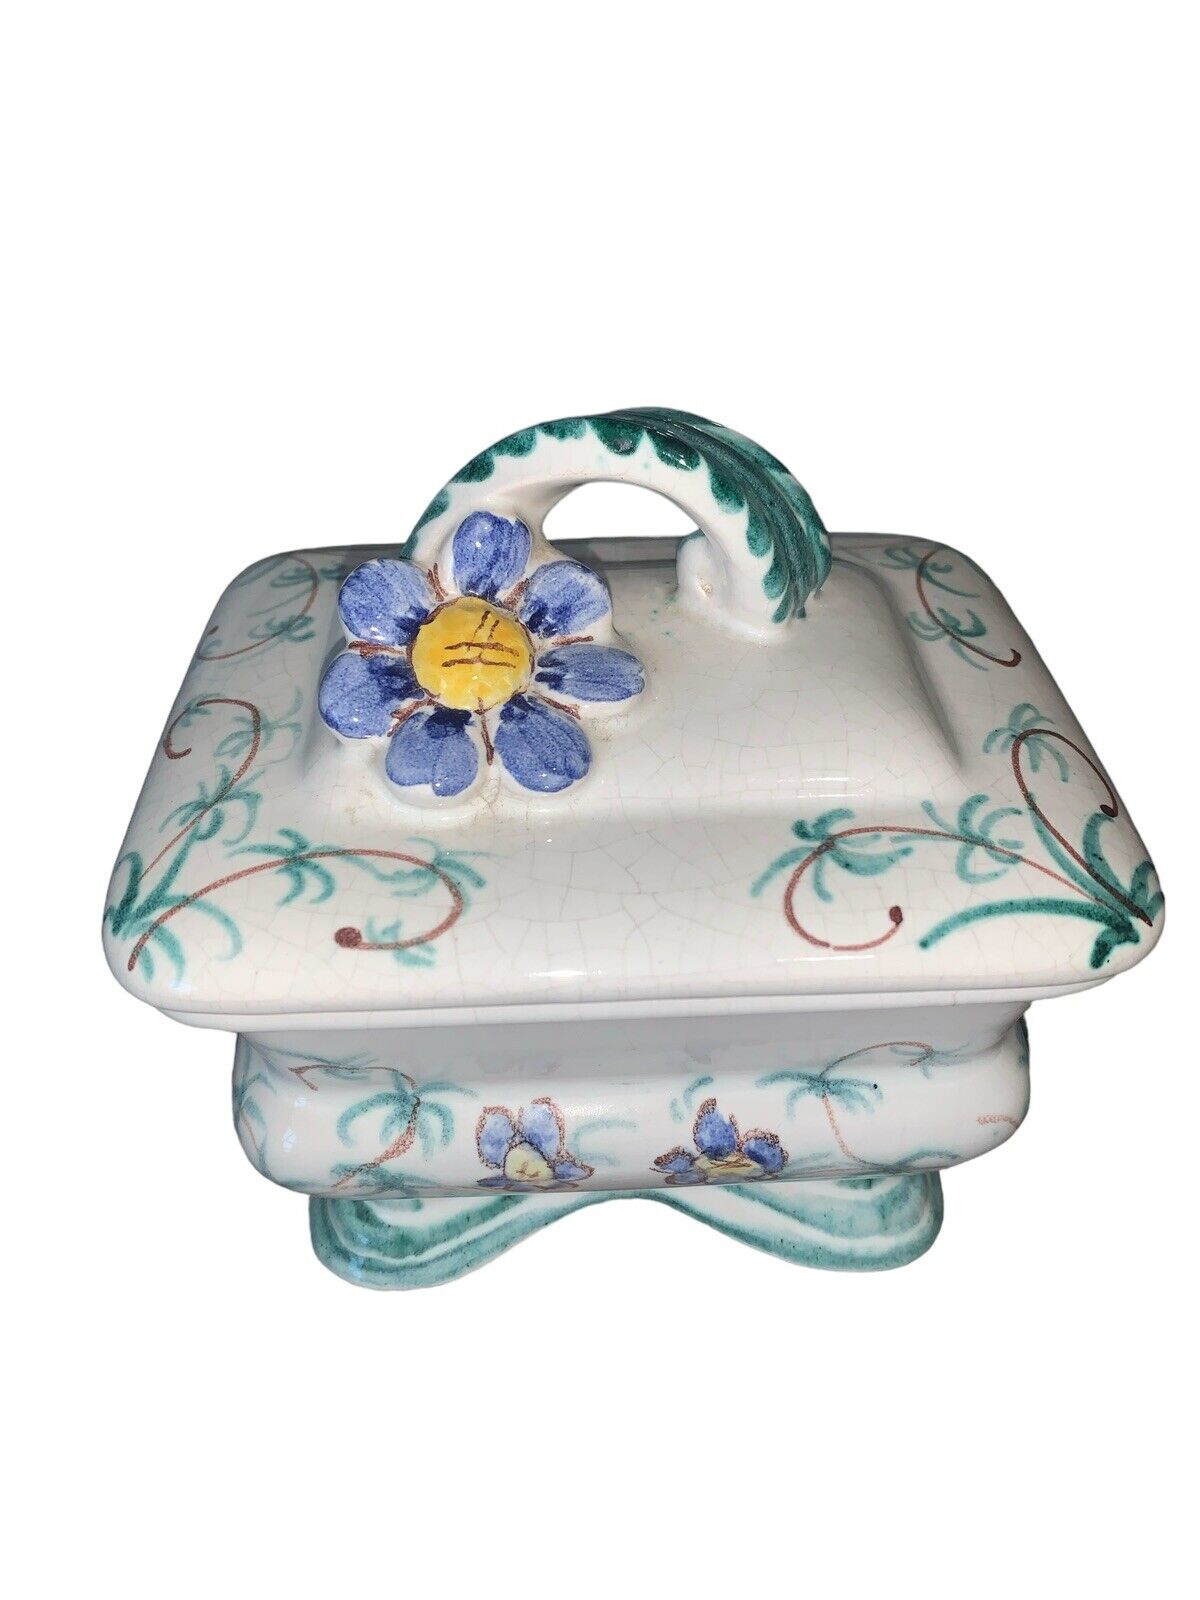 Vintage Ceramic Music Box with Flowers, hand painted Working “Nach Em Rage”